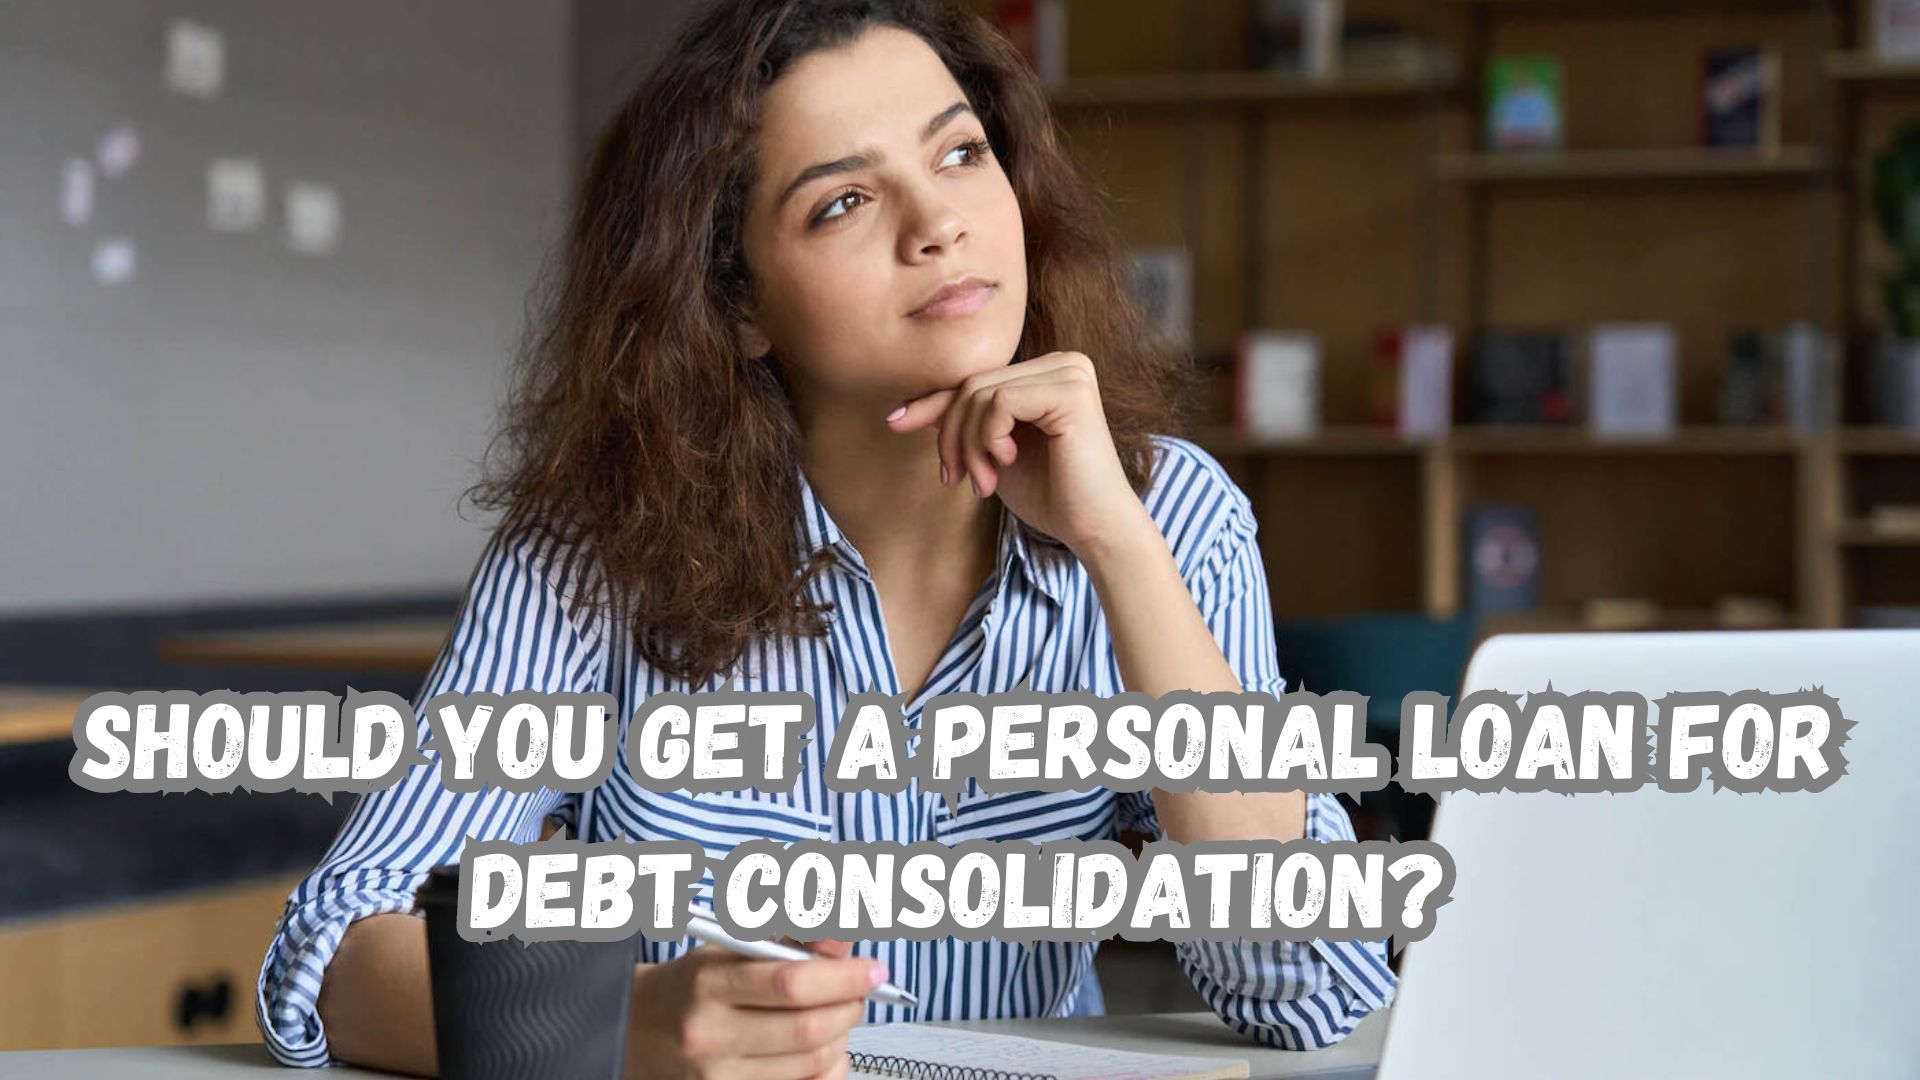 Should You Get a Personal Loan for Debt Consolidation.